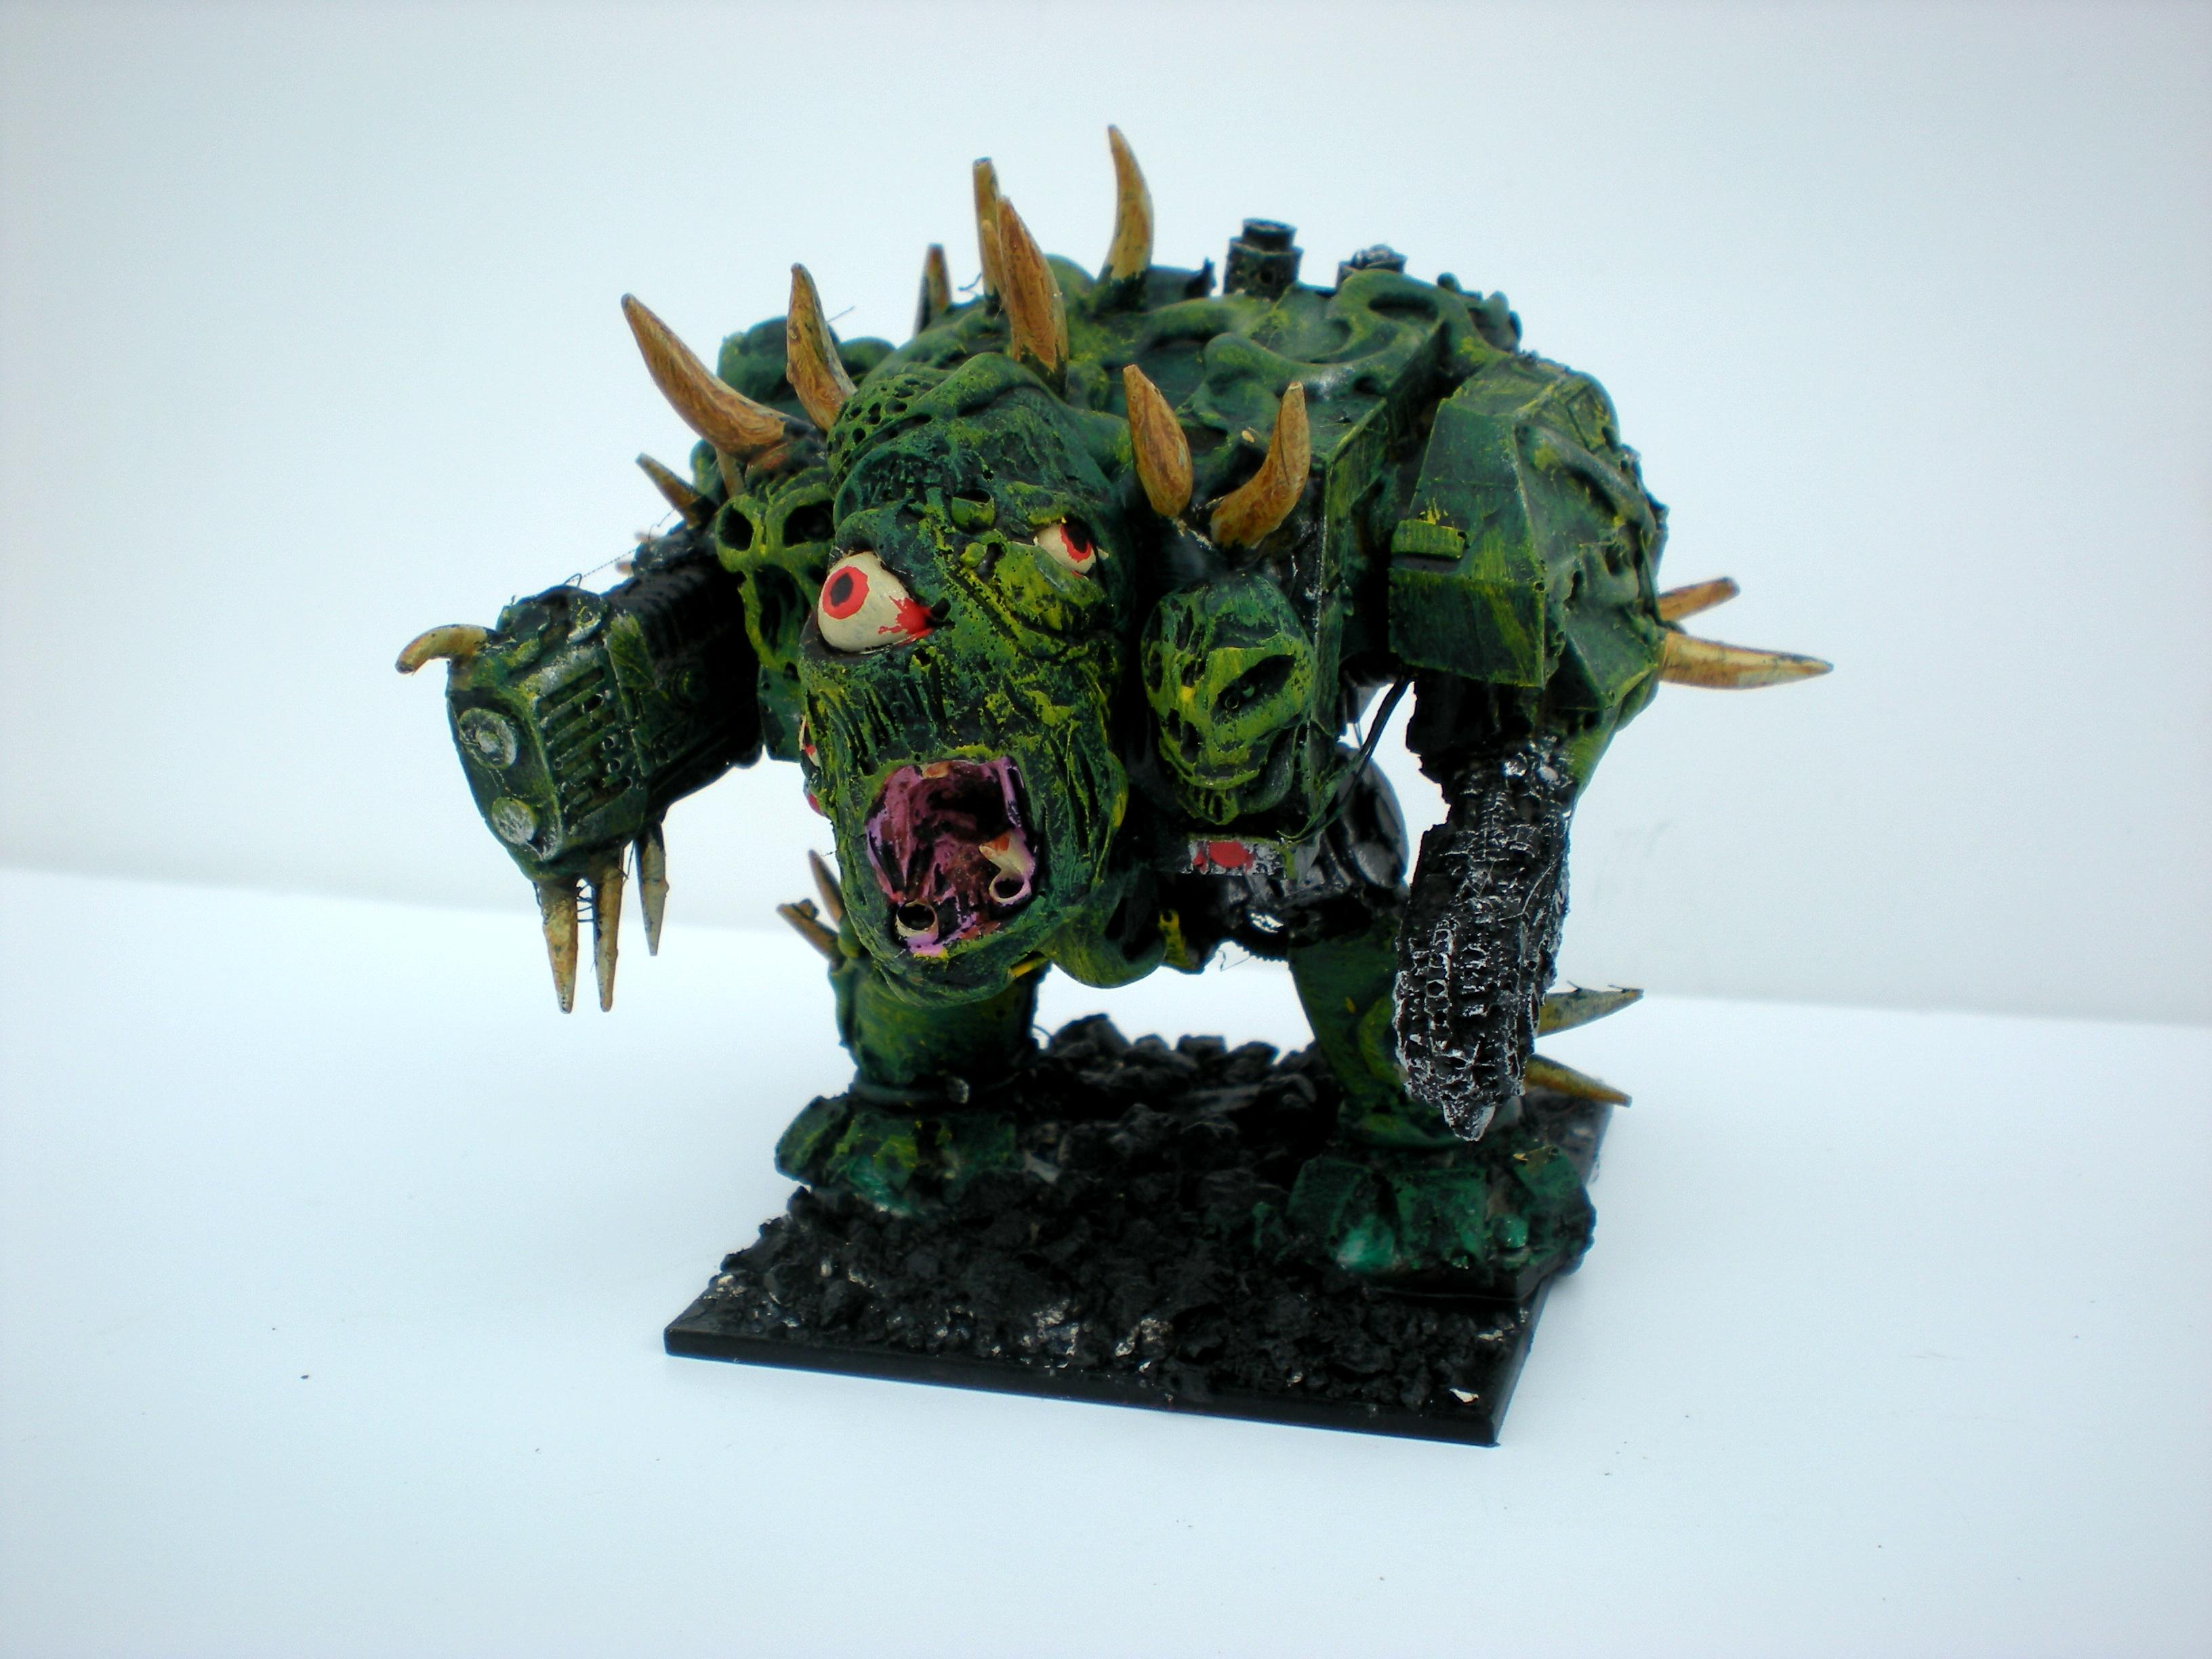 Chaos Space Marines, Dreadnought, Nurgle, Warhammer 40,000